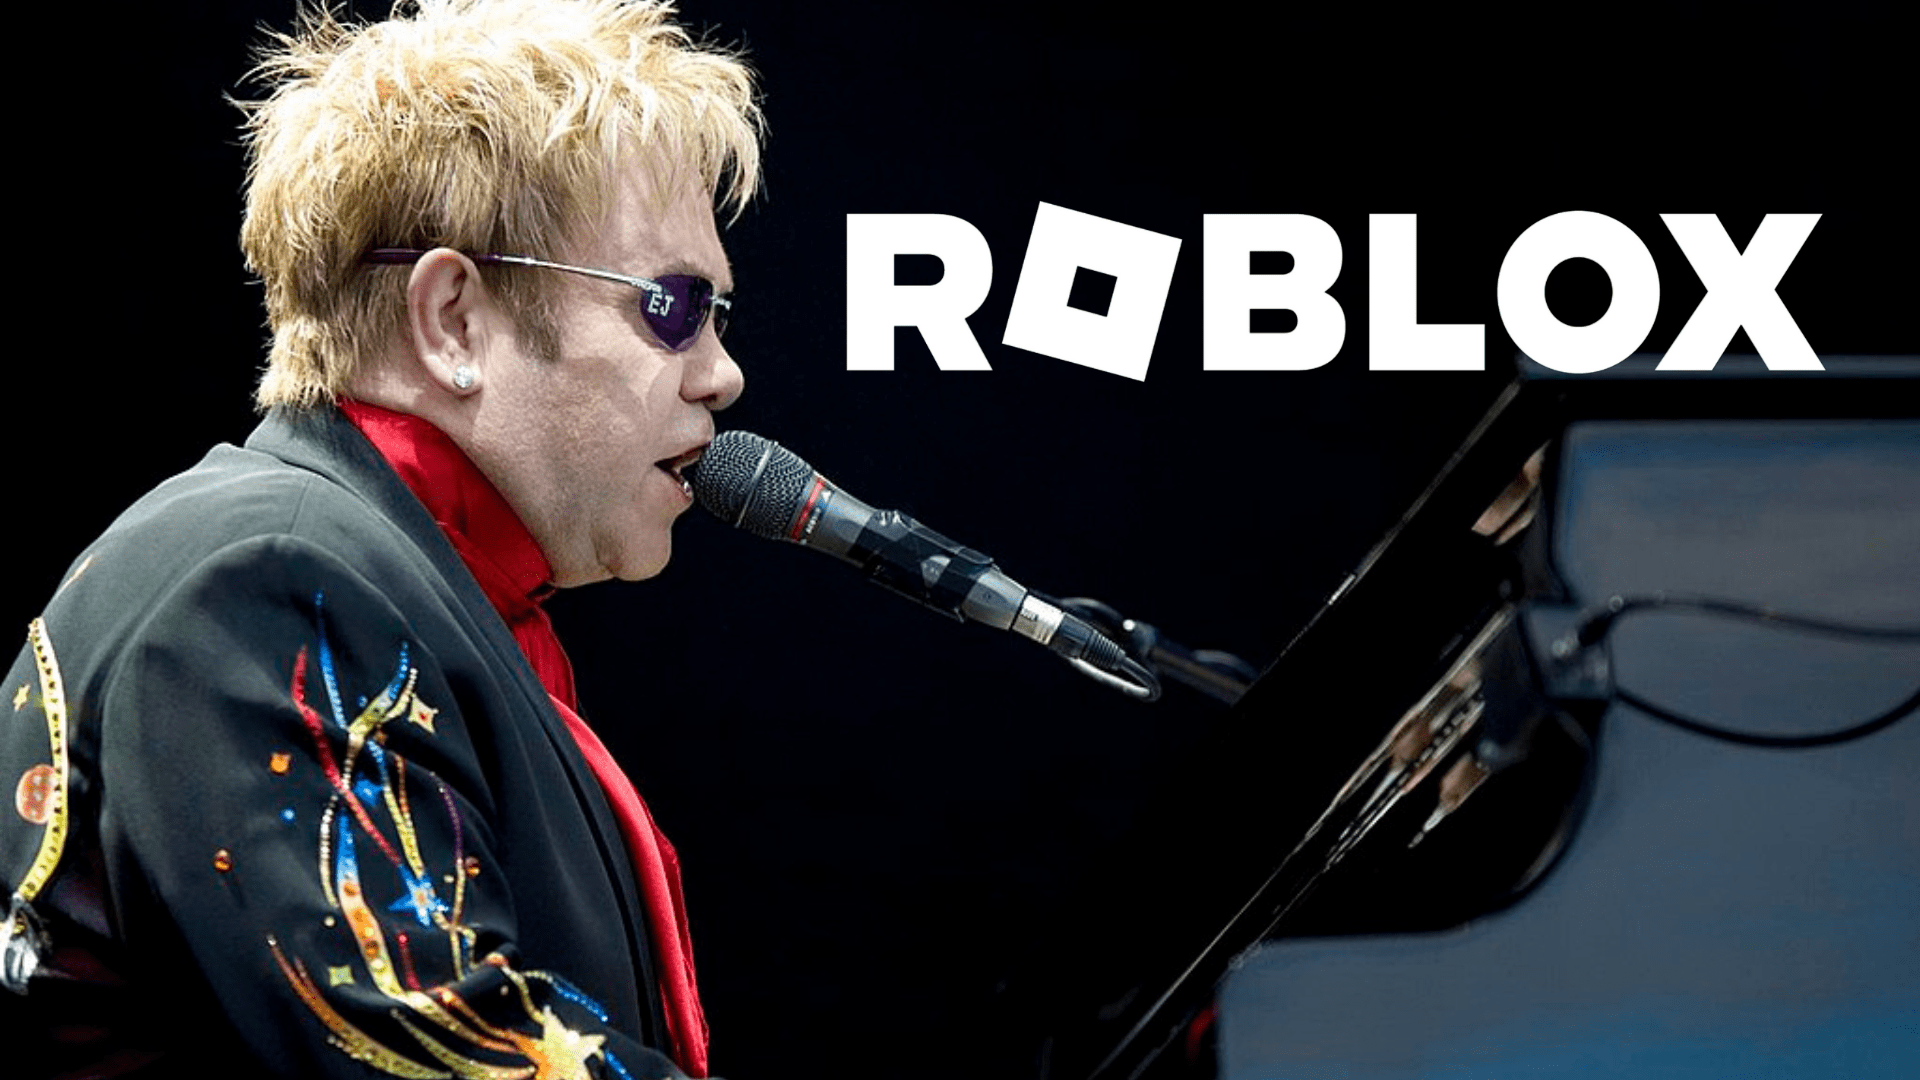 Roblox & Elton John Team Up For Virtual Concert & New Player Outfits - IMDb